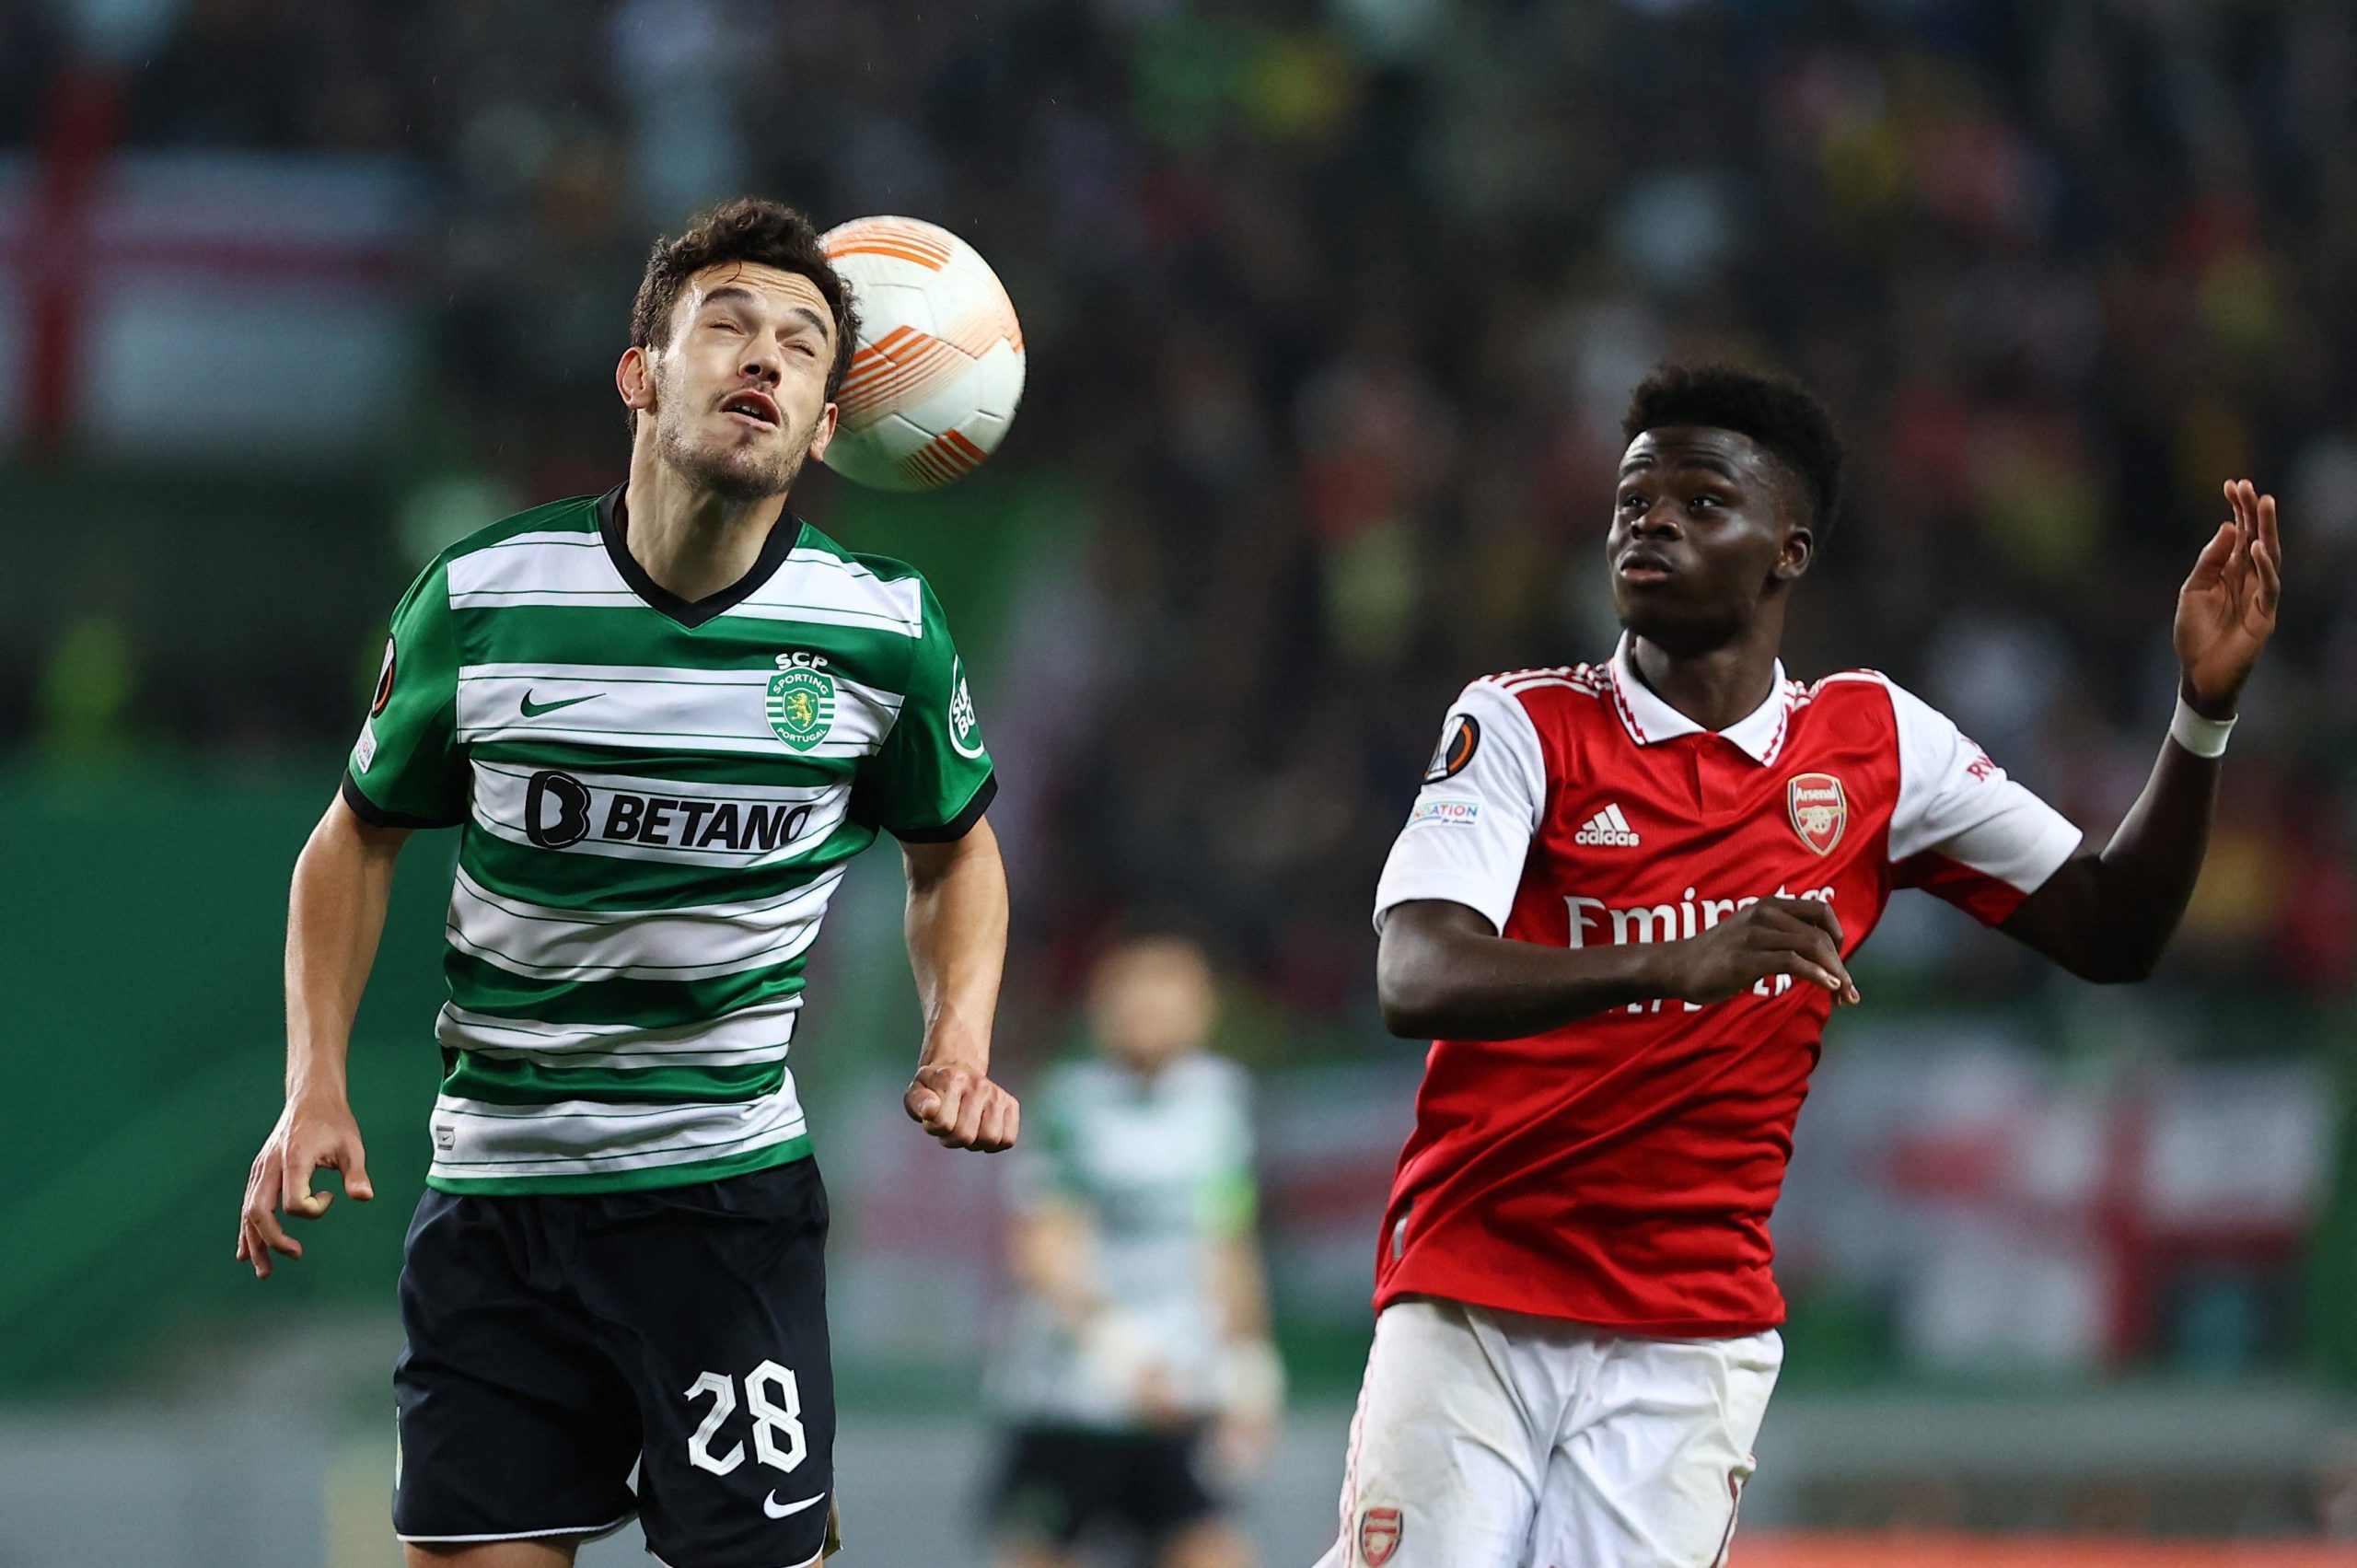 Soccer Football - Europa League - Round of 16 - First Leg - Sporting CP v Arsenal - Estadio Jose Alvalade, Lisbon, Portugal - March 9, 2023  Arsenal's Bukayo Saka in action with Sporting CP's Pedro Goncalves REUTERS/Rodrigo Antunes